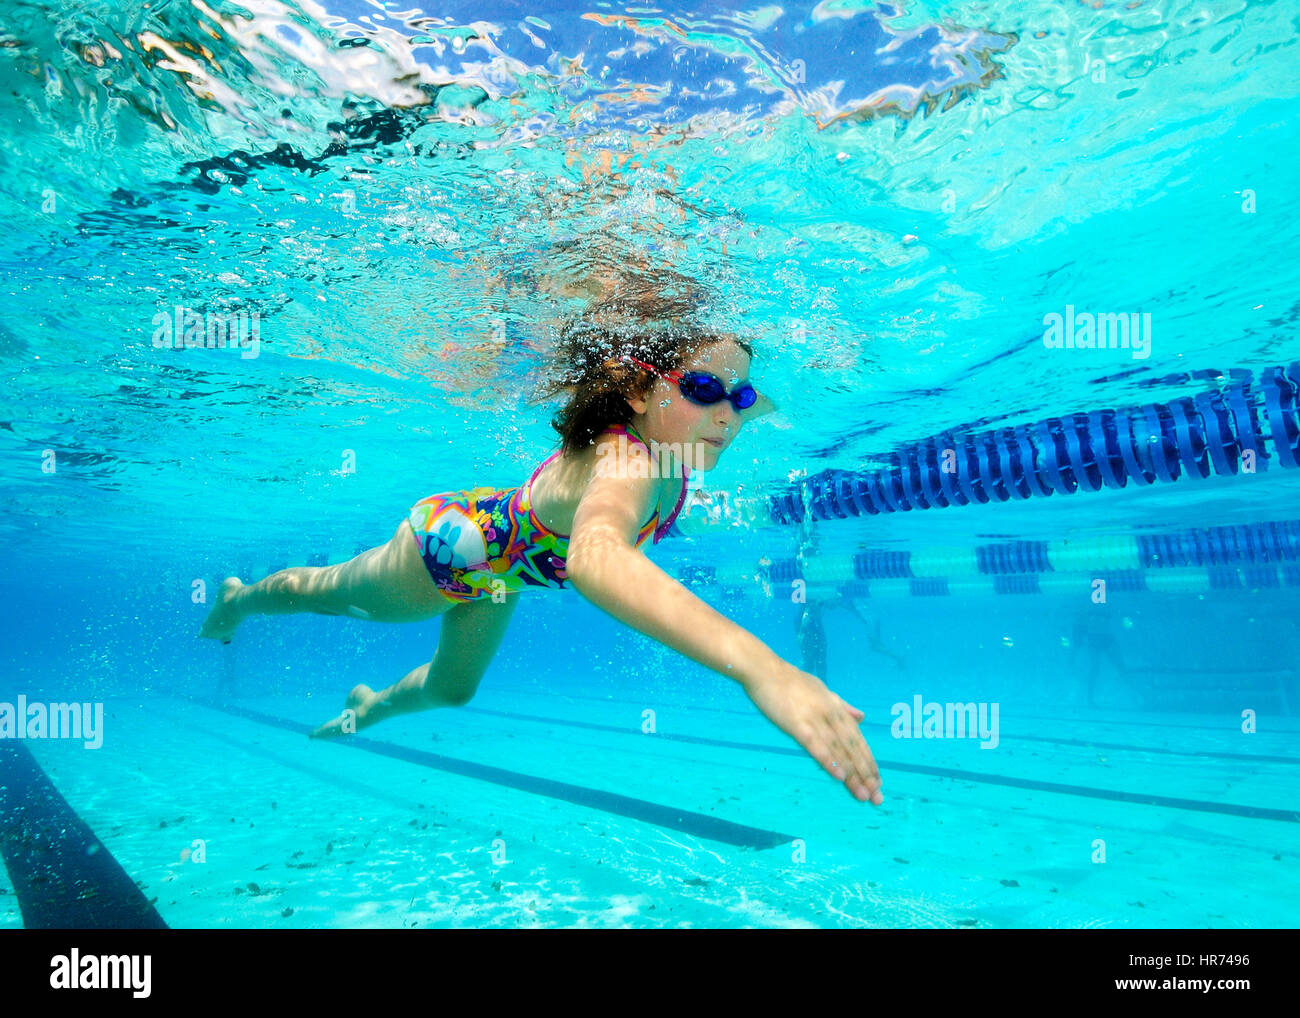 Kids swimming underwater in pool enjoying the relaxation of summer Stock Photo